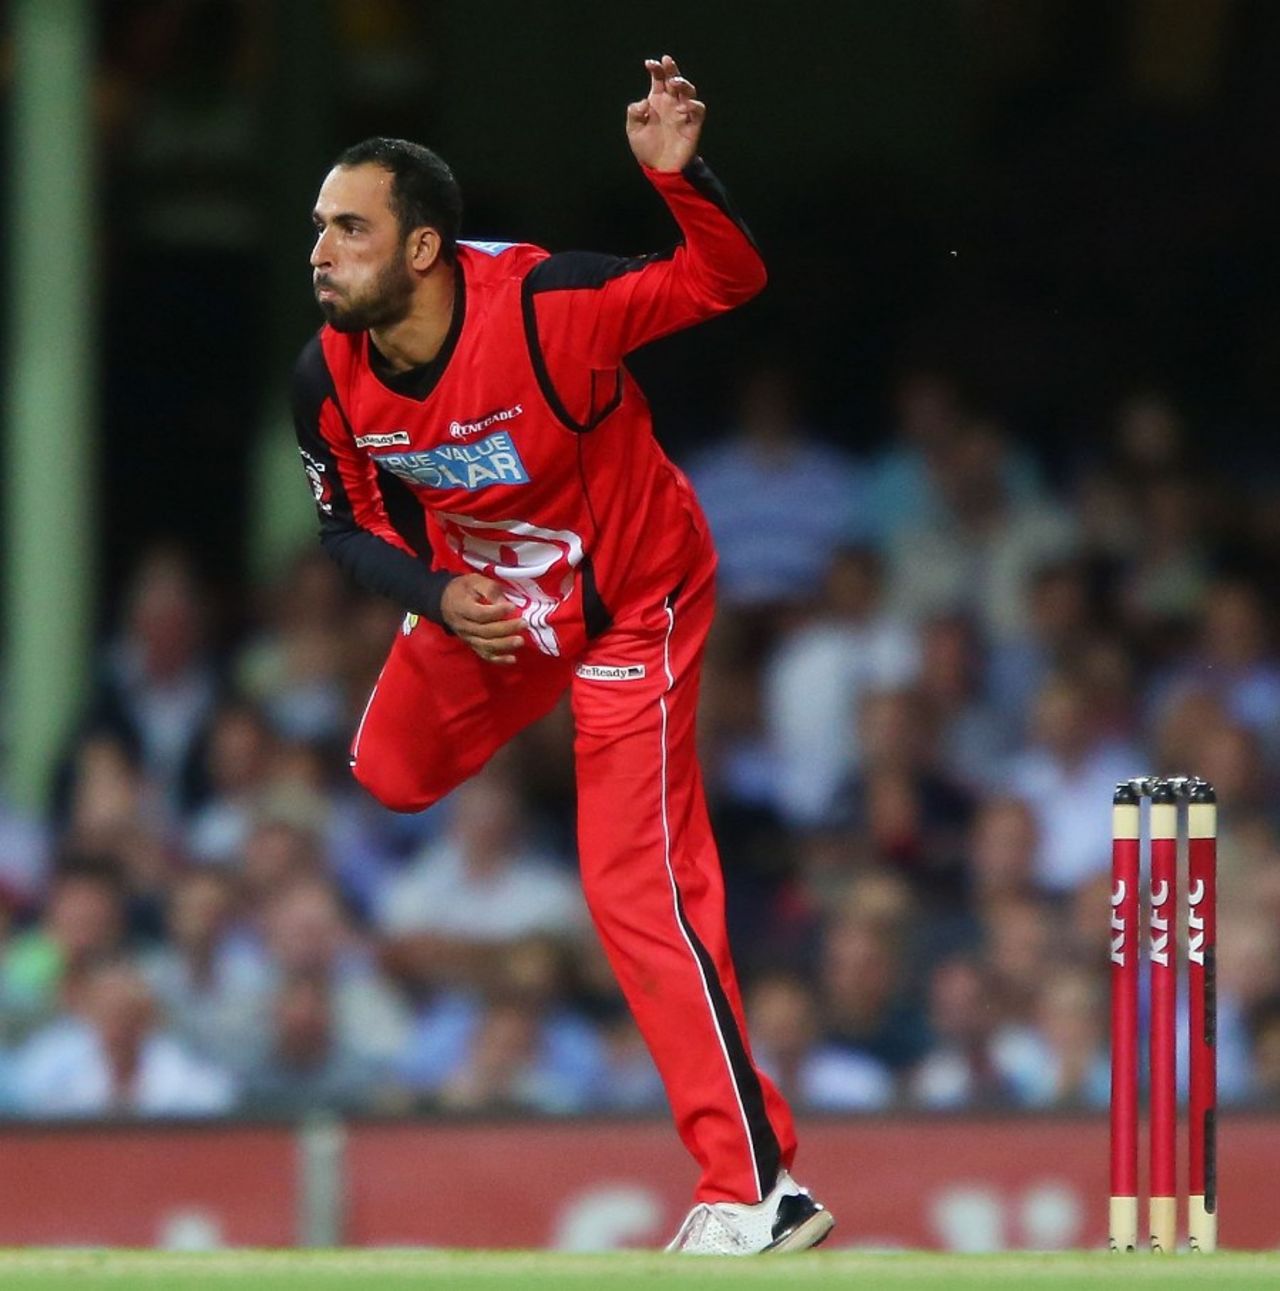 Fawad Ahmed bowls during his BBL debut, Sydney Sixers v Melbourne Renegades, BBL 2012-13, January 9, 2013